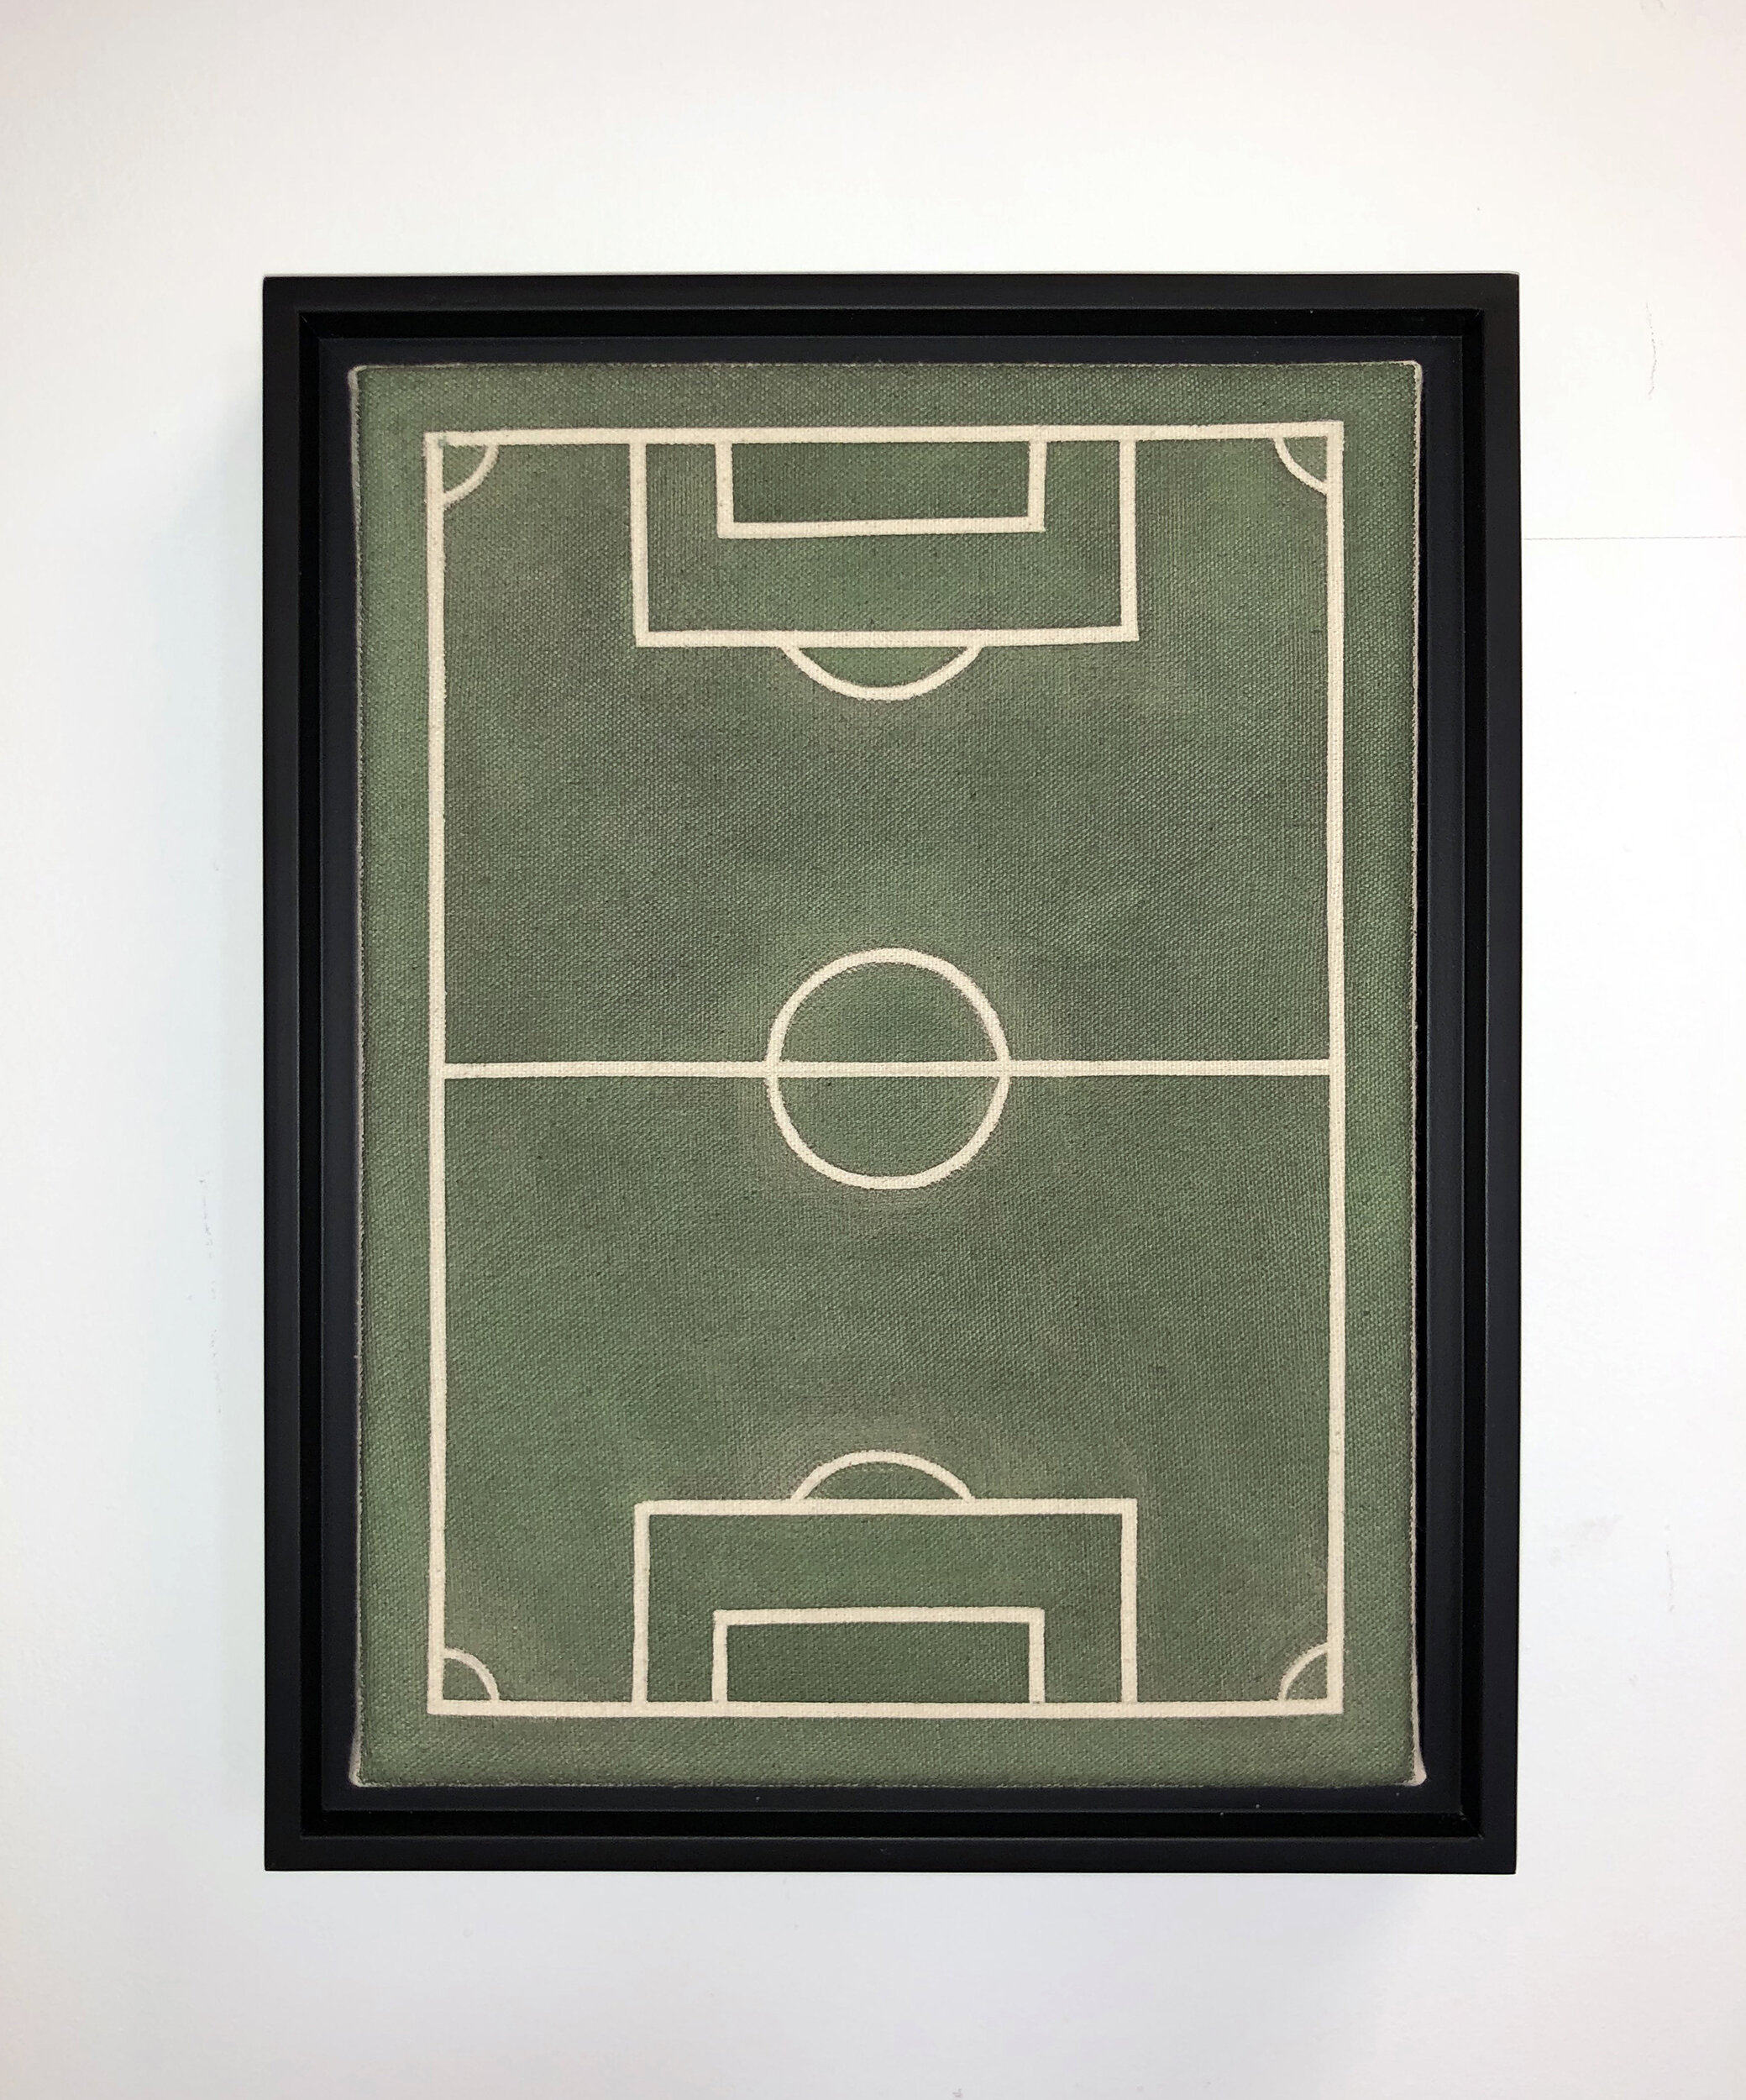   The Beautiful Game (for Dad) (and Raoul de Keyser) , 2020 Acrylic stain on canvas 9 x 12 inches (23cm x 30cm) 